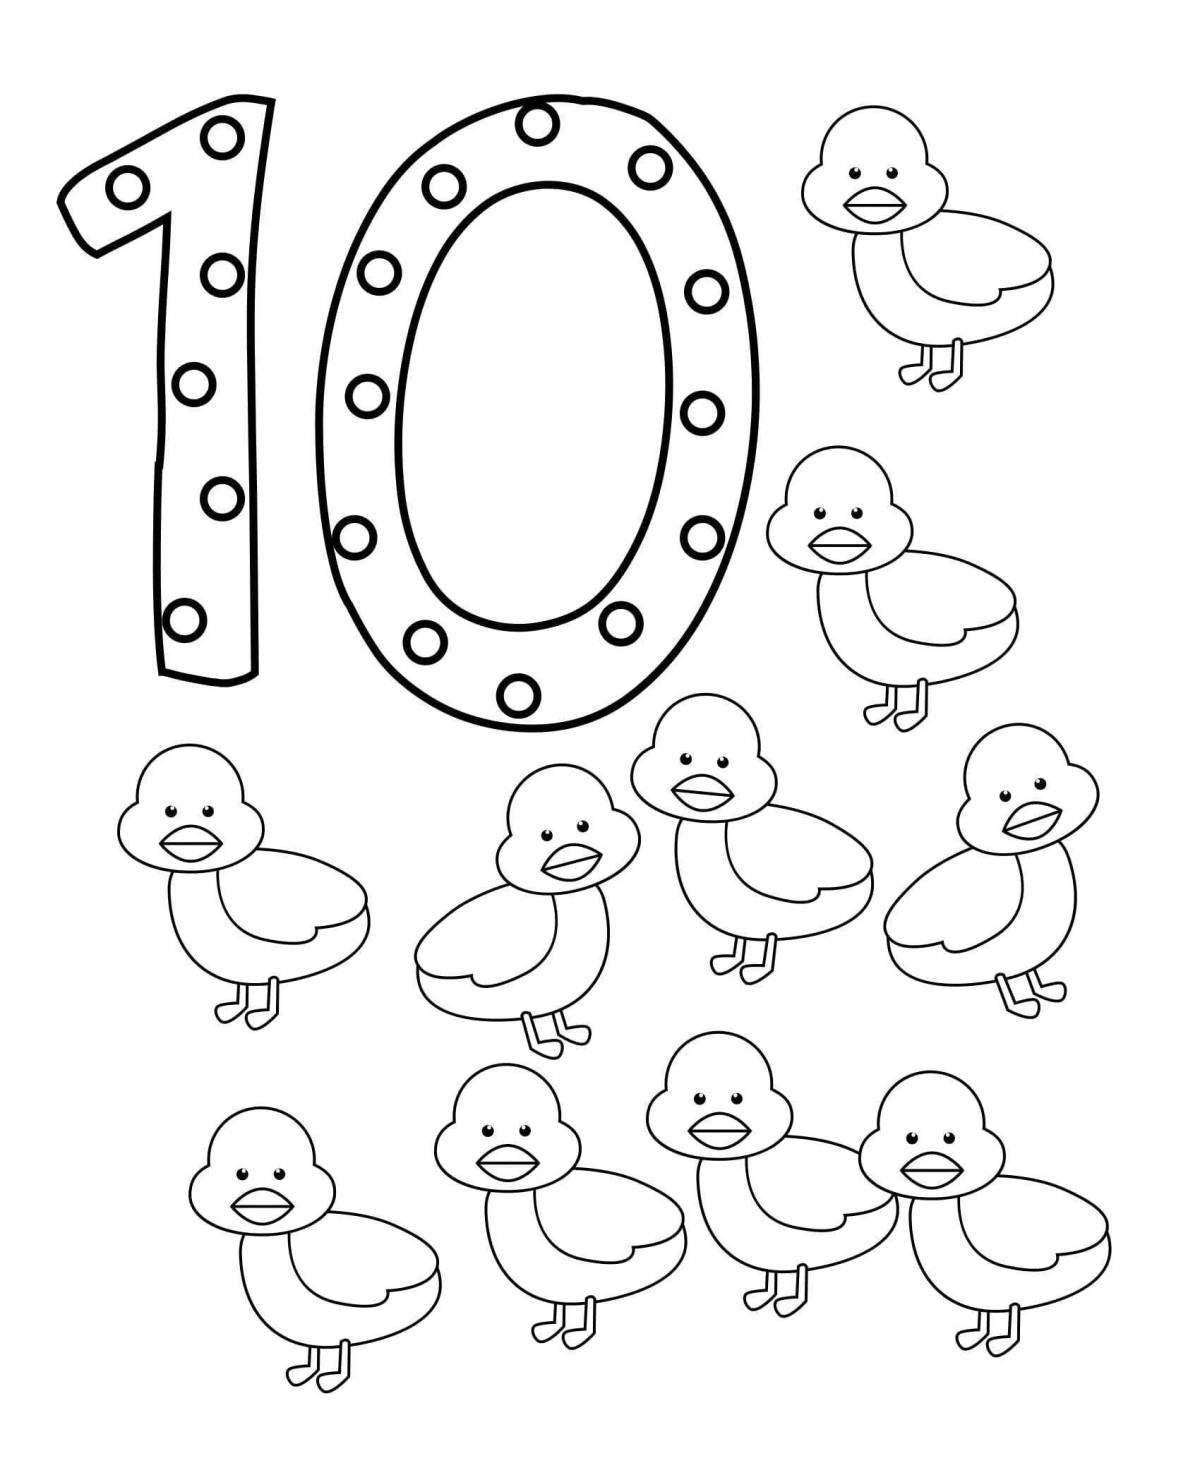 Crazy number 6 coloring pages for preschoolers